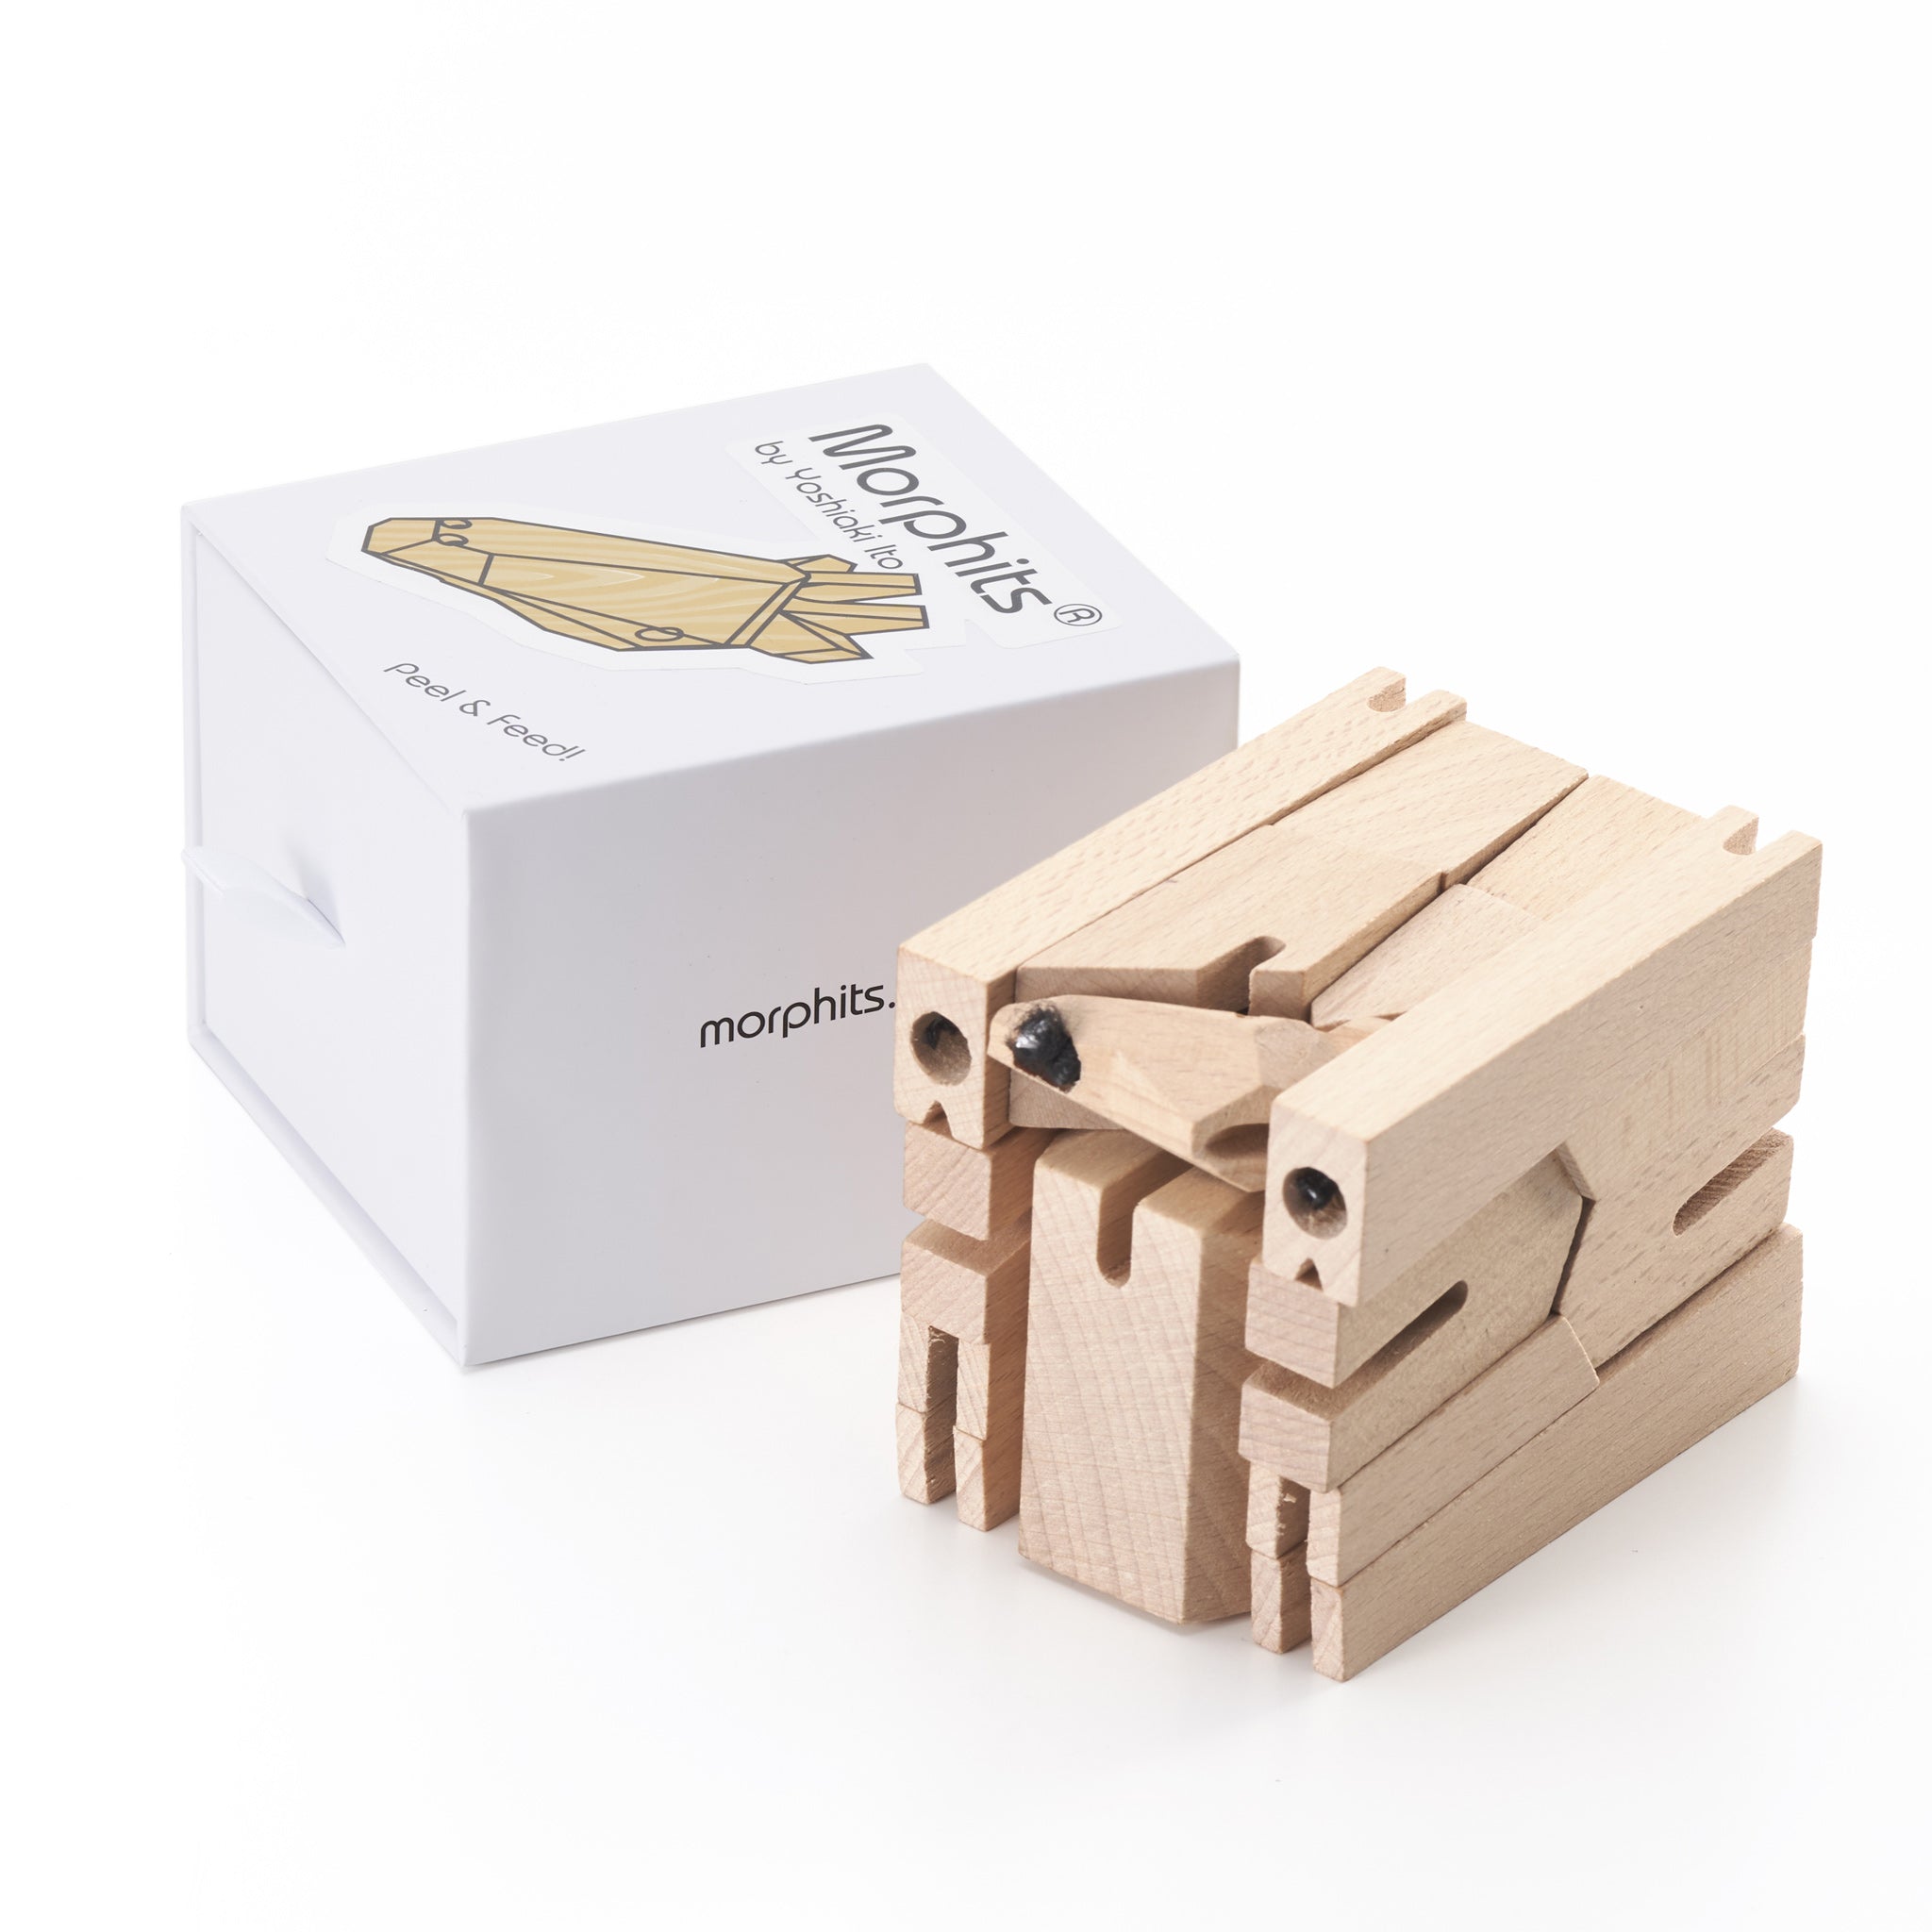 Morphits ® Giraffe Wooden Toy: Elevate Playtime with Tall Tales in our Wooden Playset World - Yoshiaki Ito Design Cuboid N1